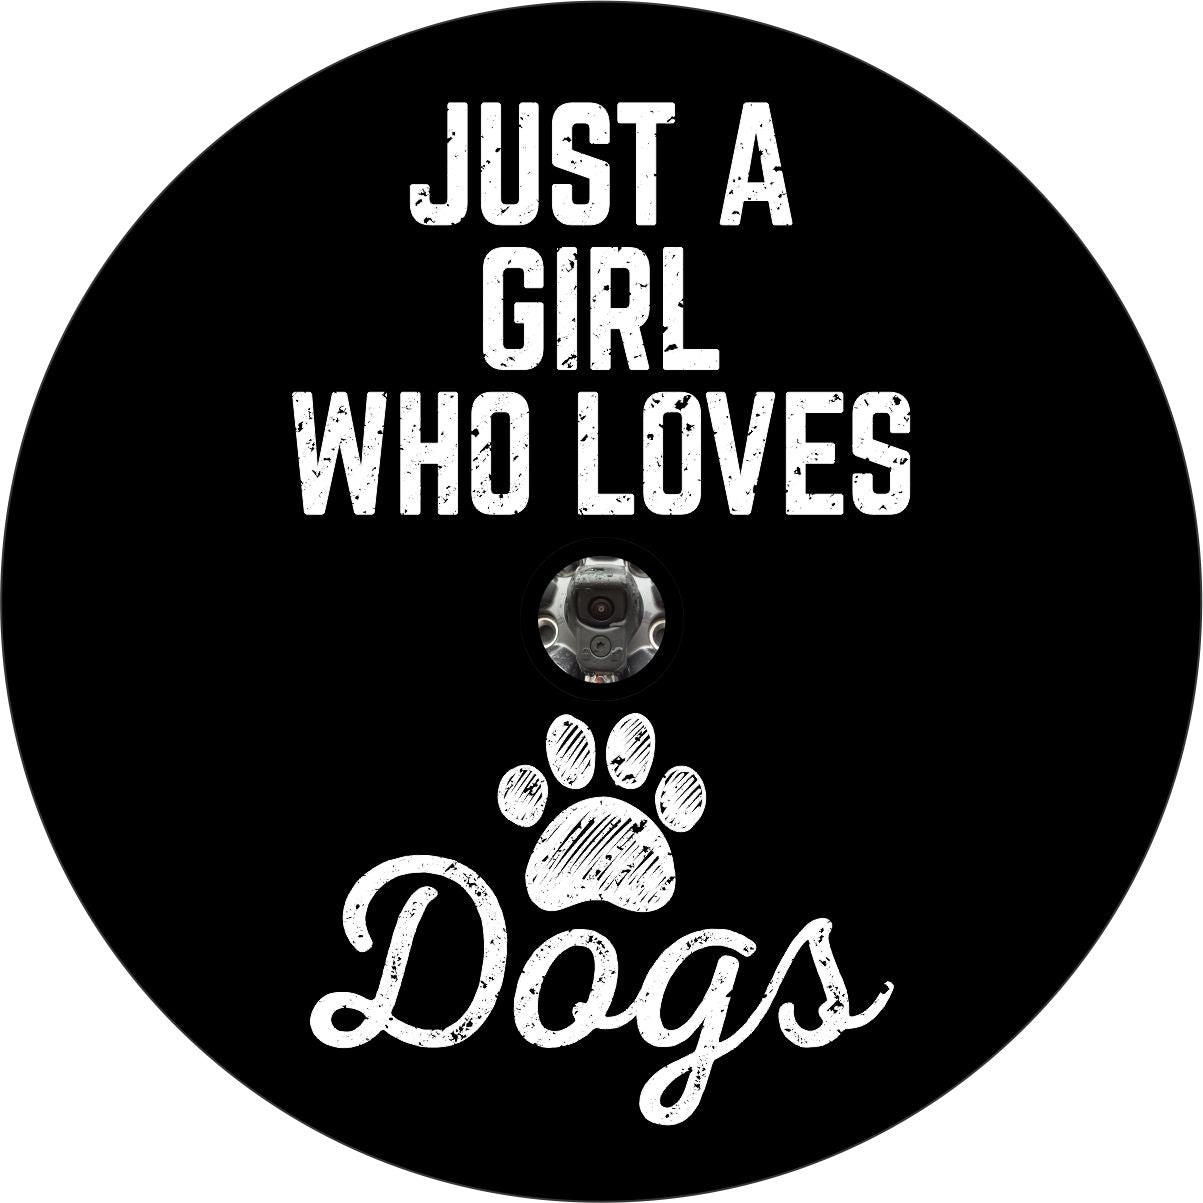 Just a girl who loves dogs written in a chalk font design with a paw print as a spare tire cover design for a Jeep, Bronco, RV, van, camper or any other vehicle's spare tire cover with a hole for a backup camera.